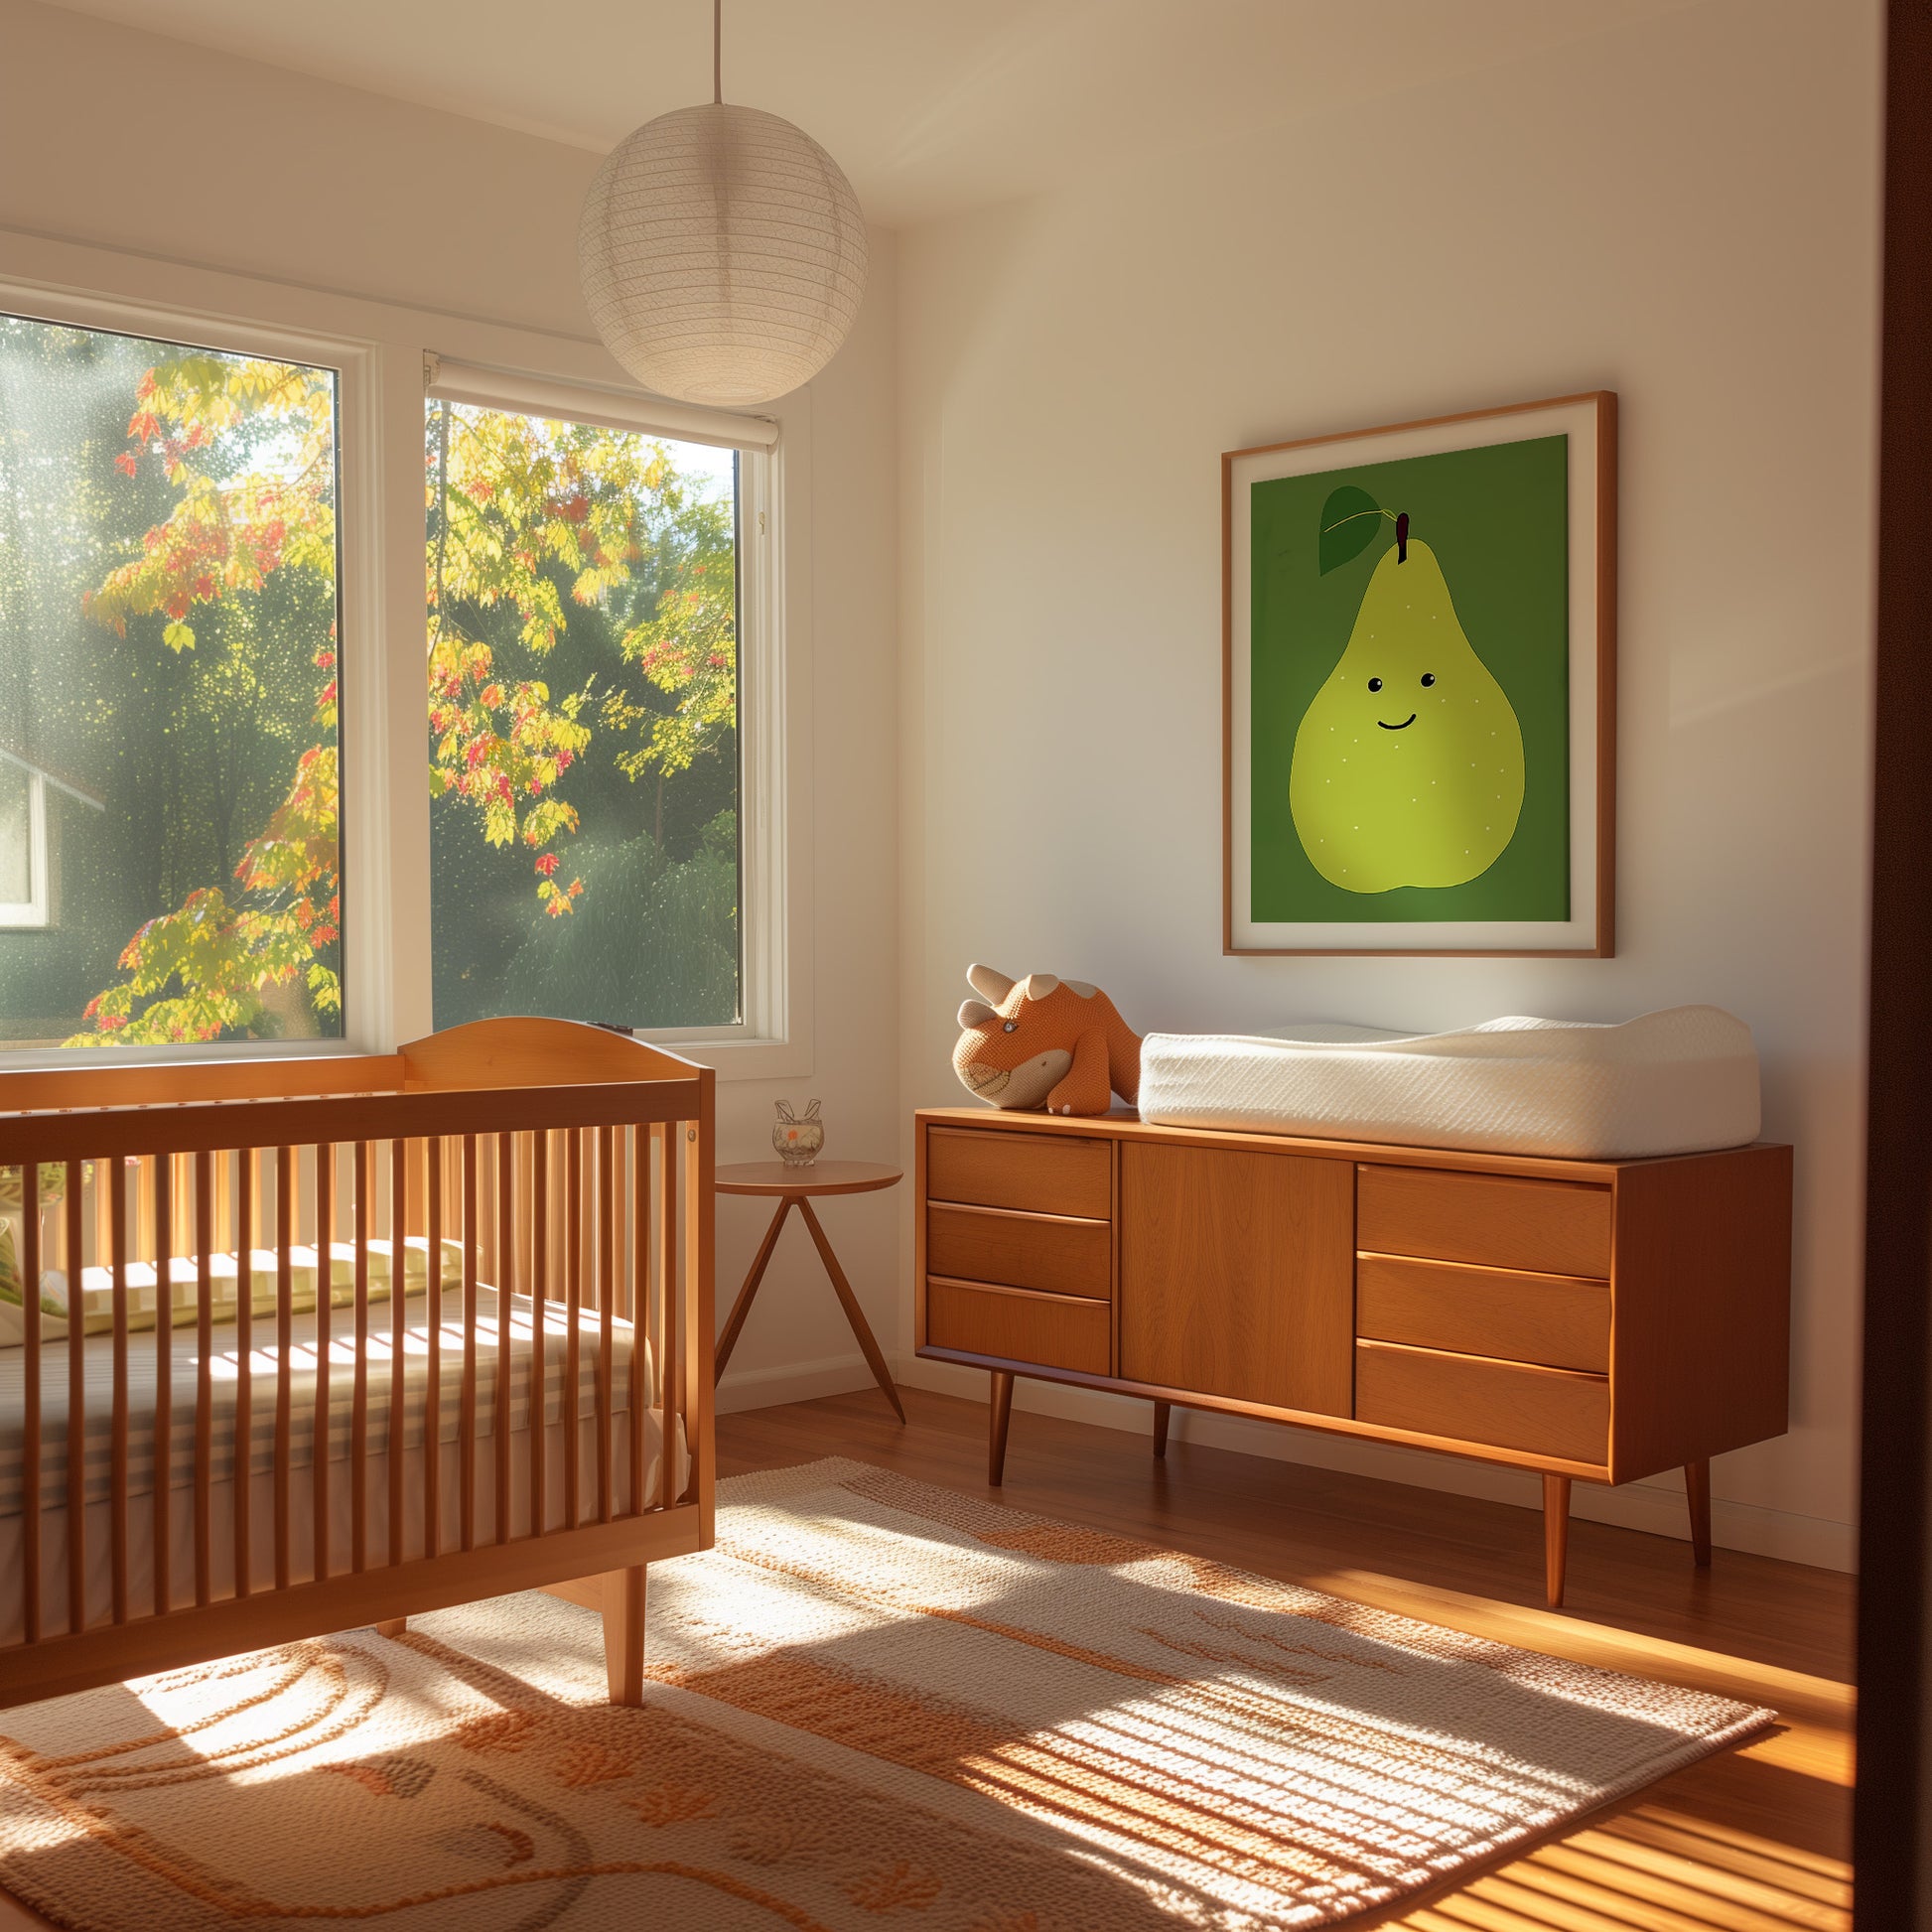 A cozy nursery with a crib, dresser, and colorful autumn trees outside the window.